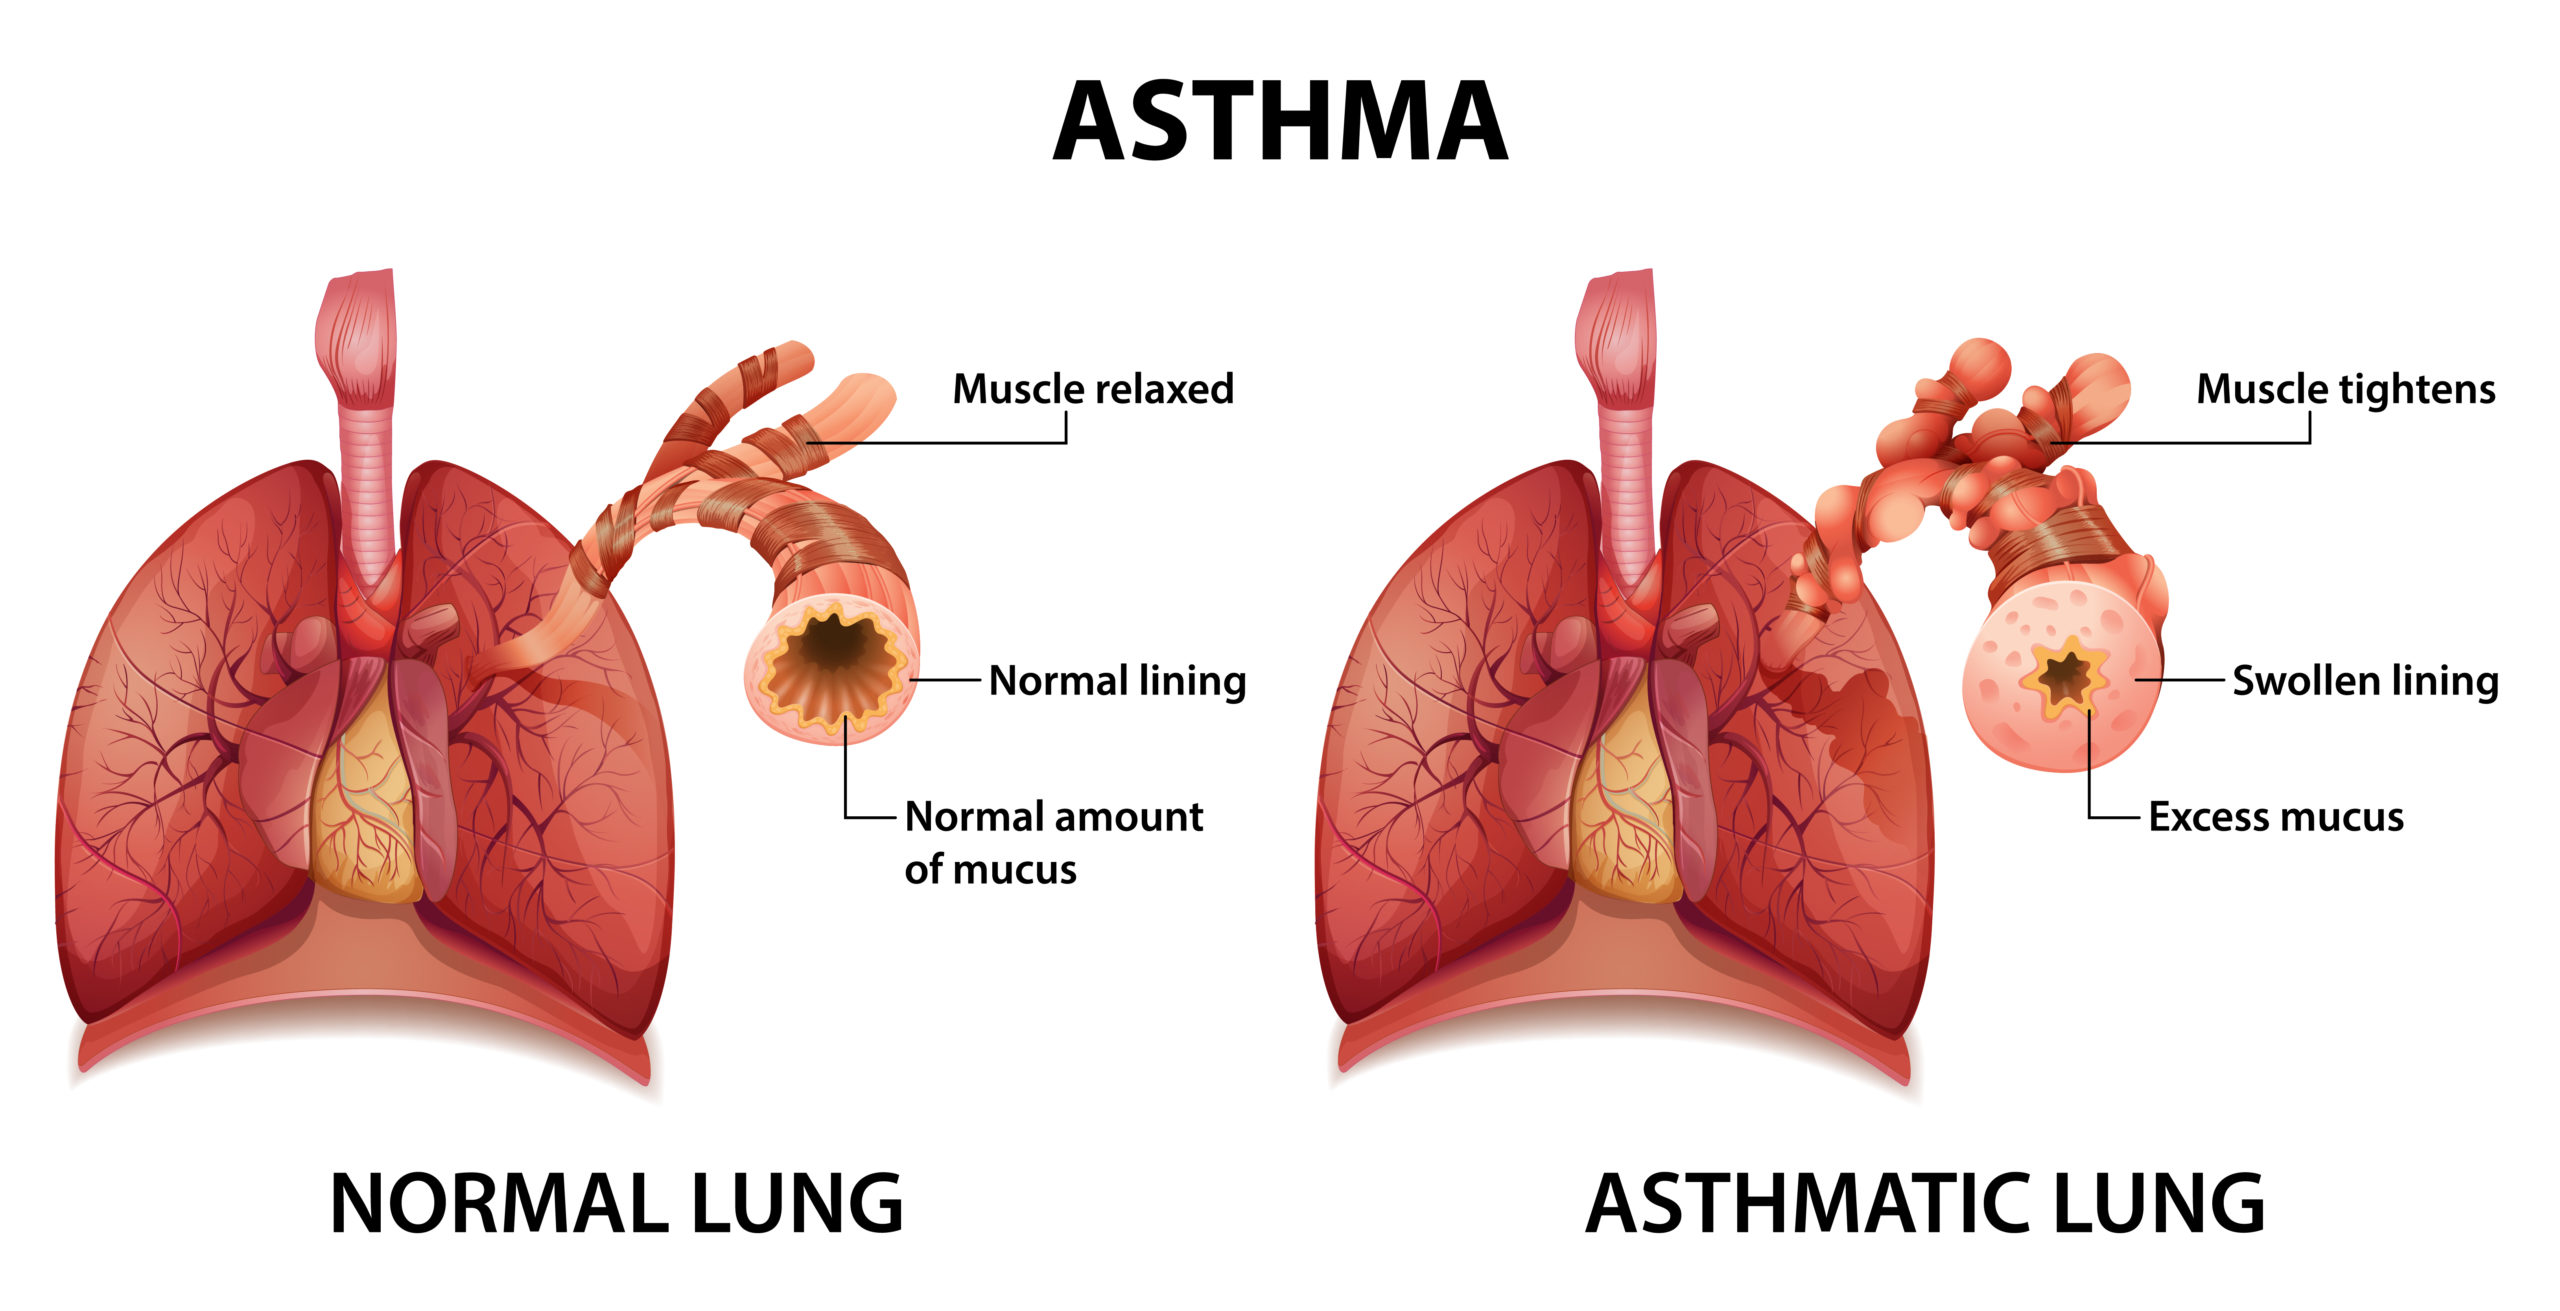 Asthma Wheezing: All you need to know about it